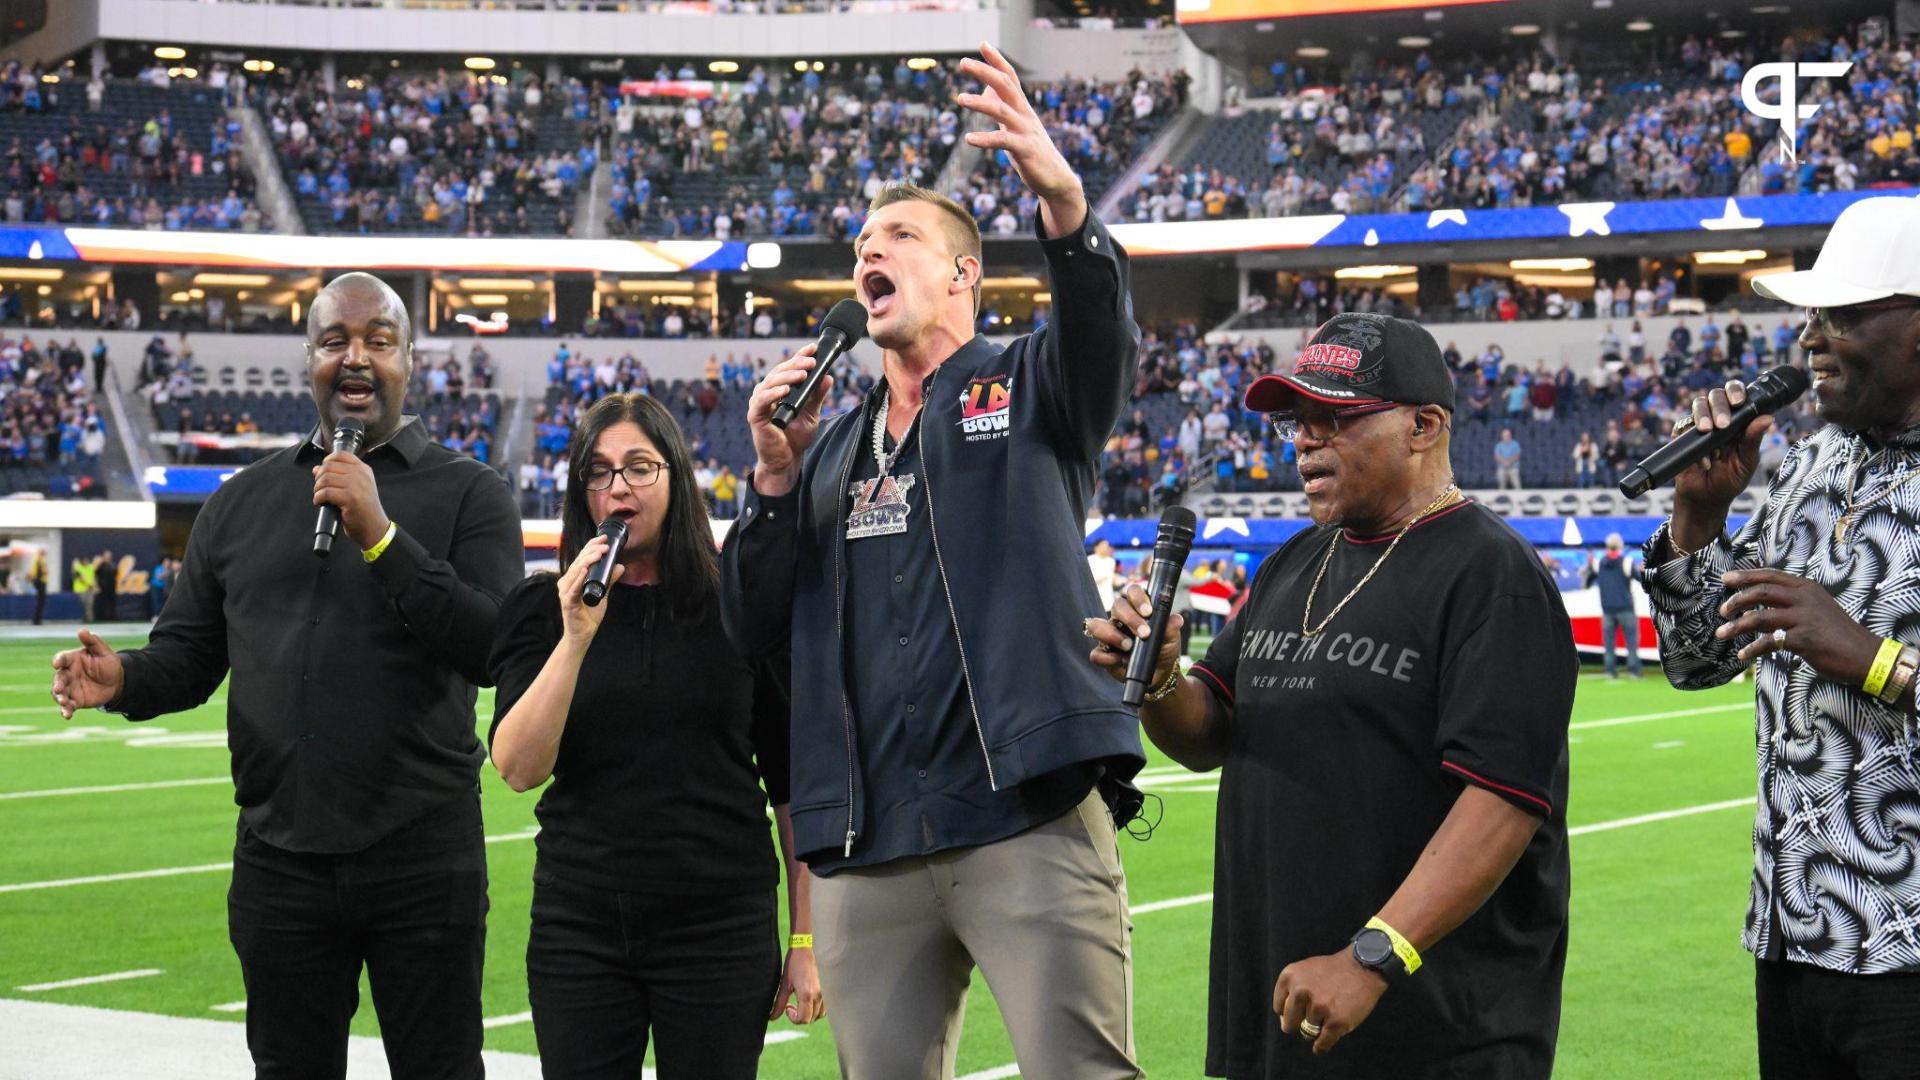 Rob Gronkowski (middle) sings during the National Anthem with the New Directions Veterans Choir before the Starco Brands LA Bowl at SoFi Stadium. Gronkowski is the host of the game.